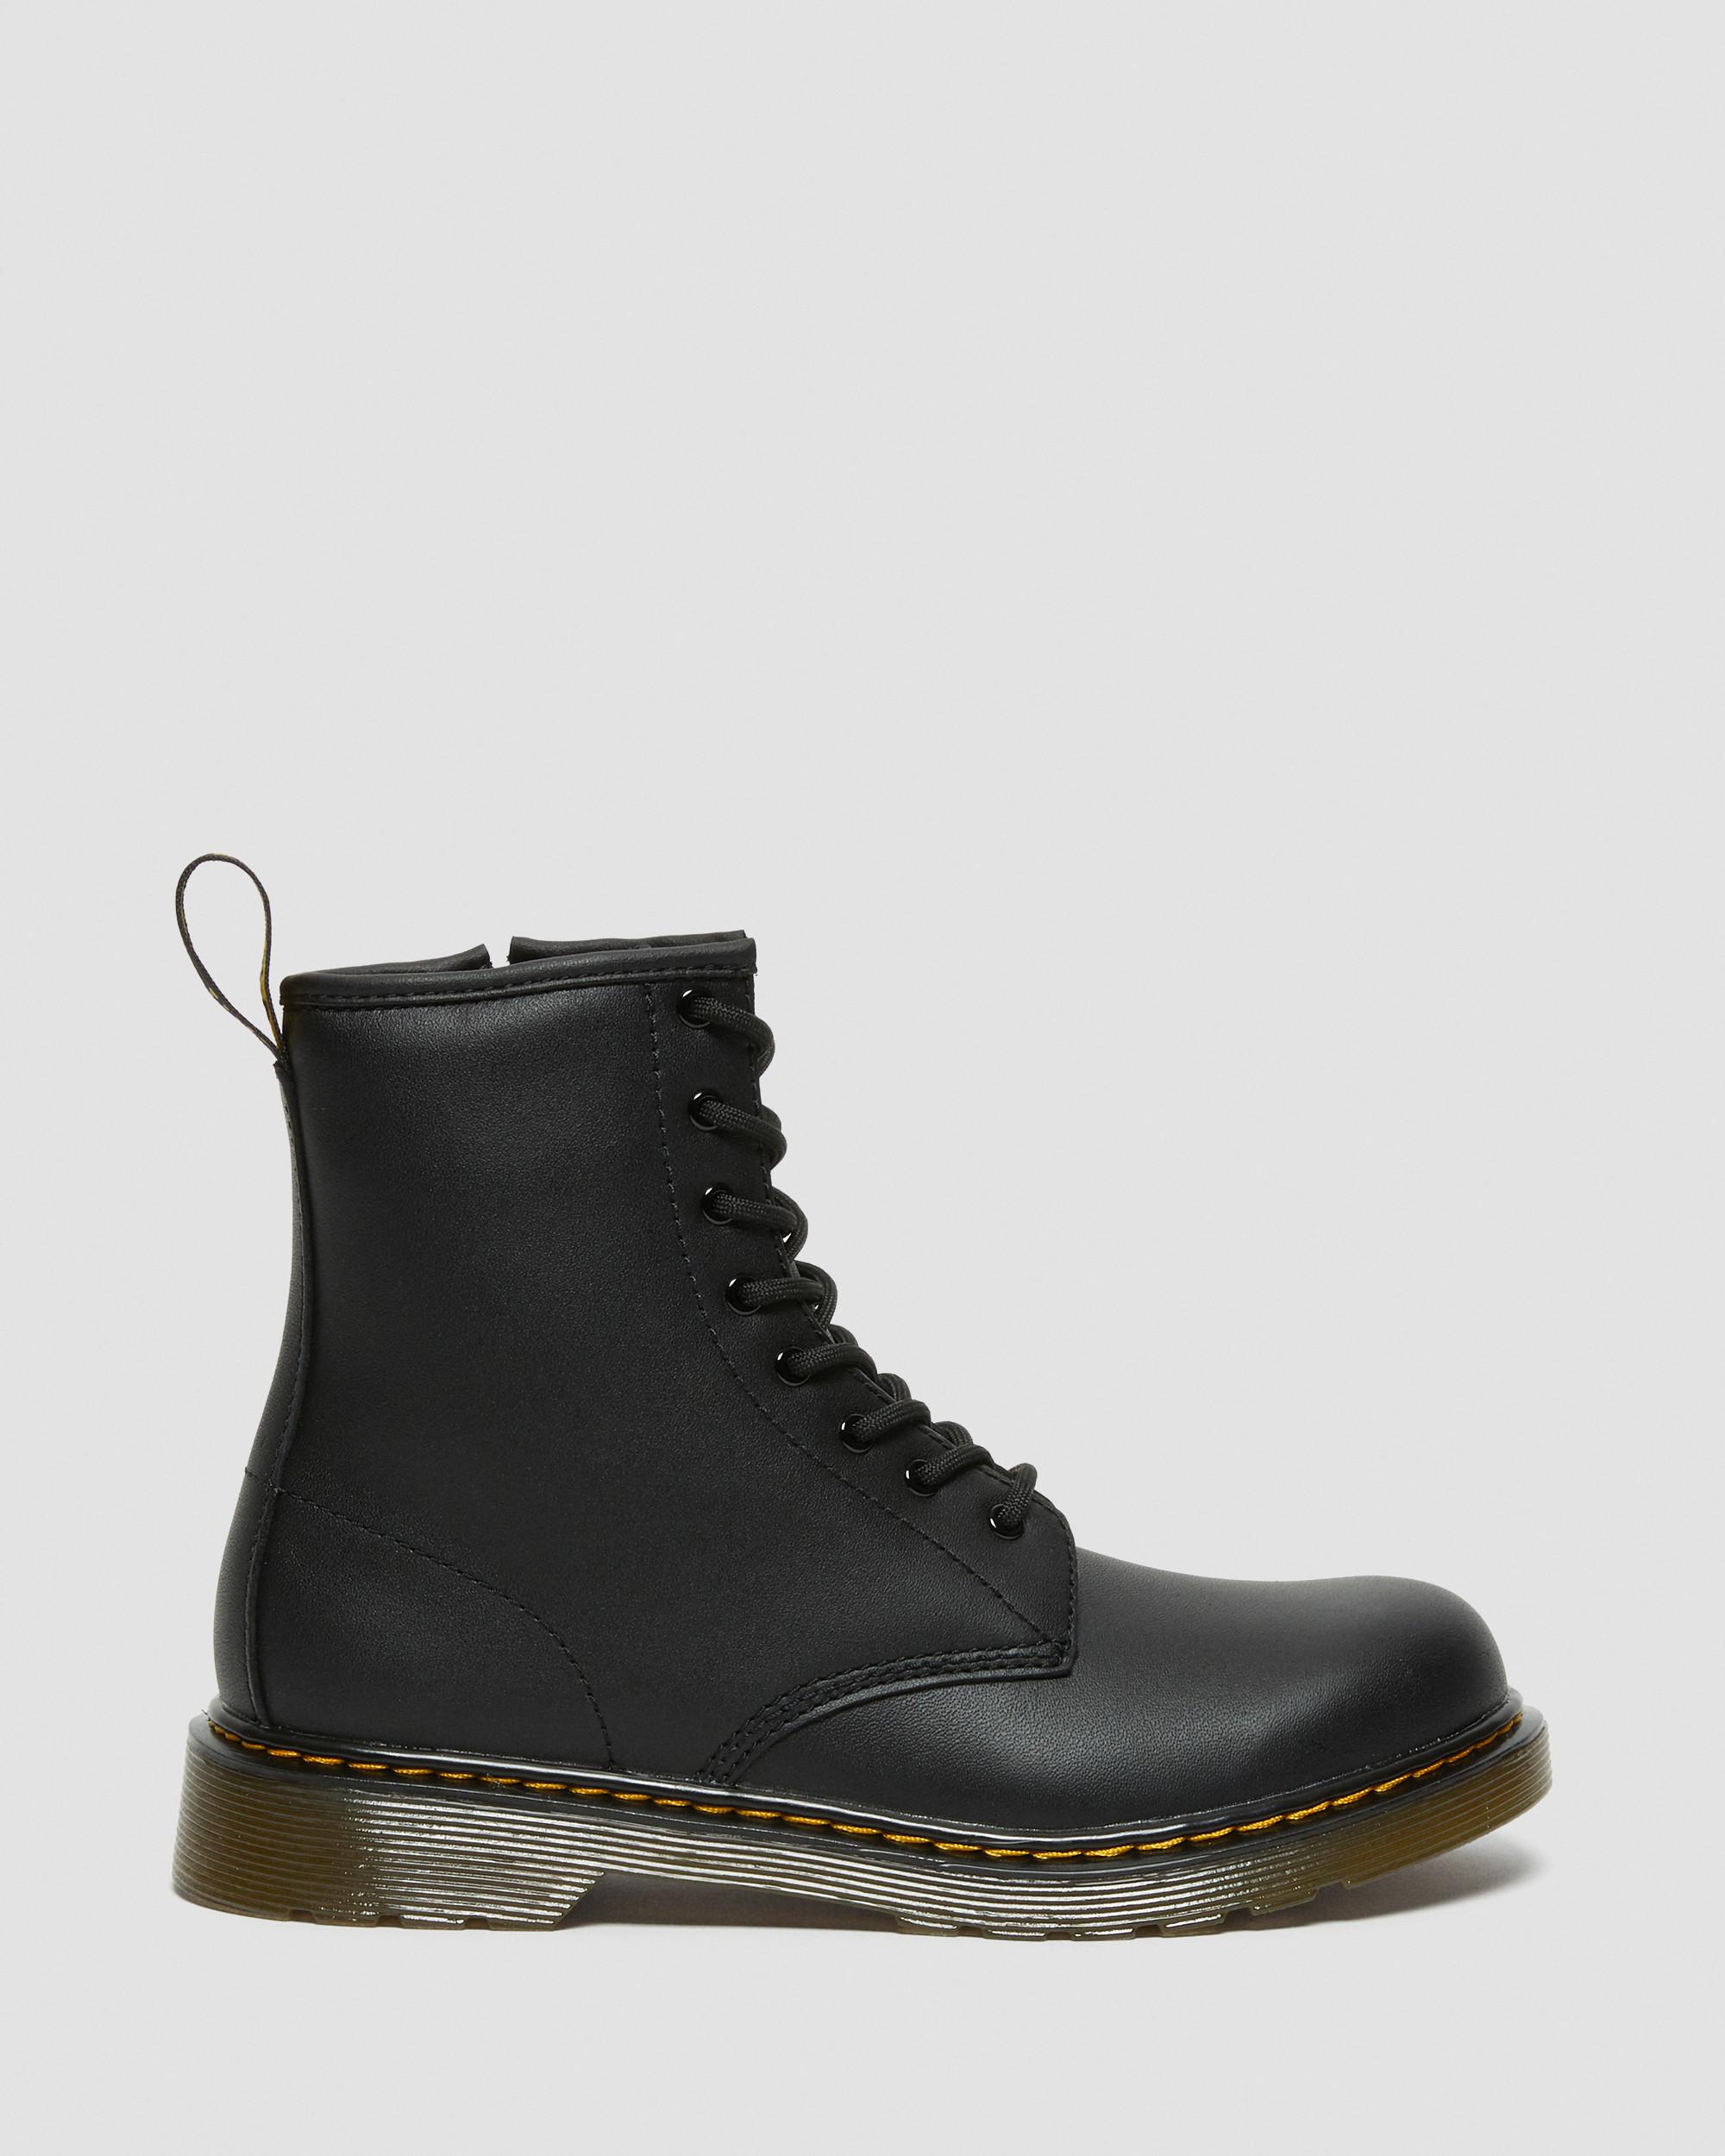 Youth 1460 Softy T Leather Lace Up Boots in Black | Dr. Martens